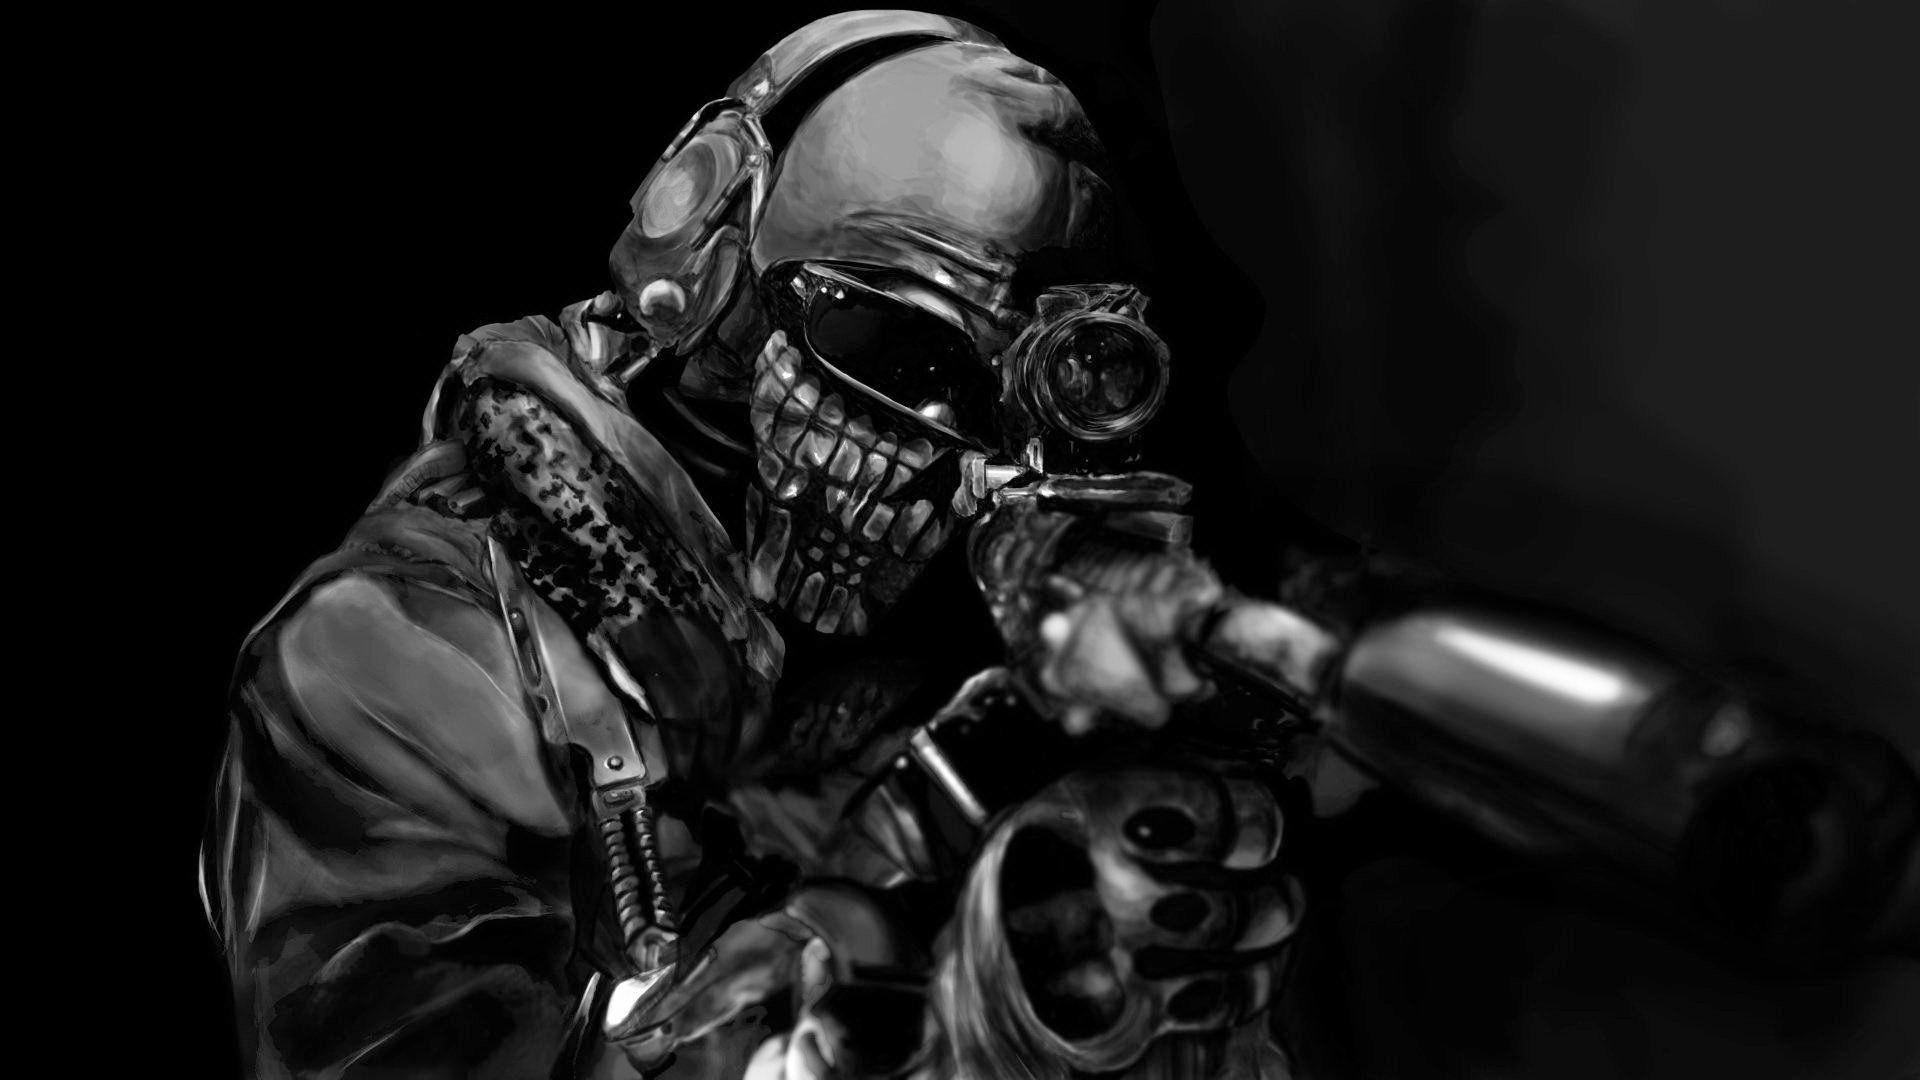 Call of Duty Ghosts Wallpapers 1920x1080 in HD